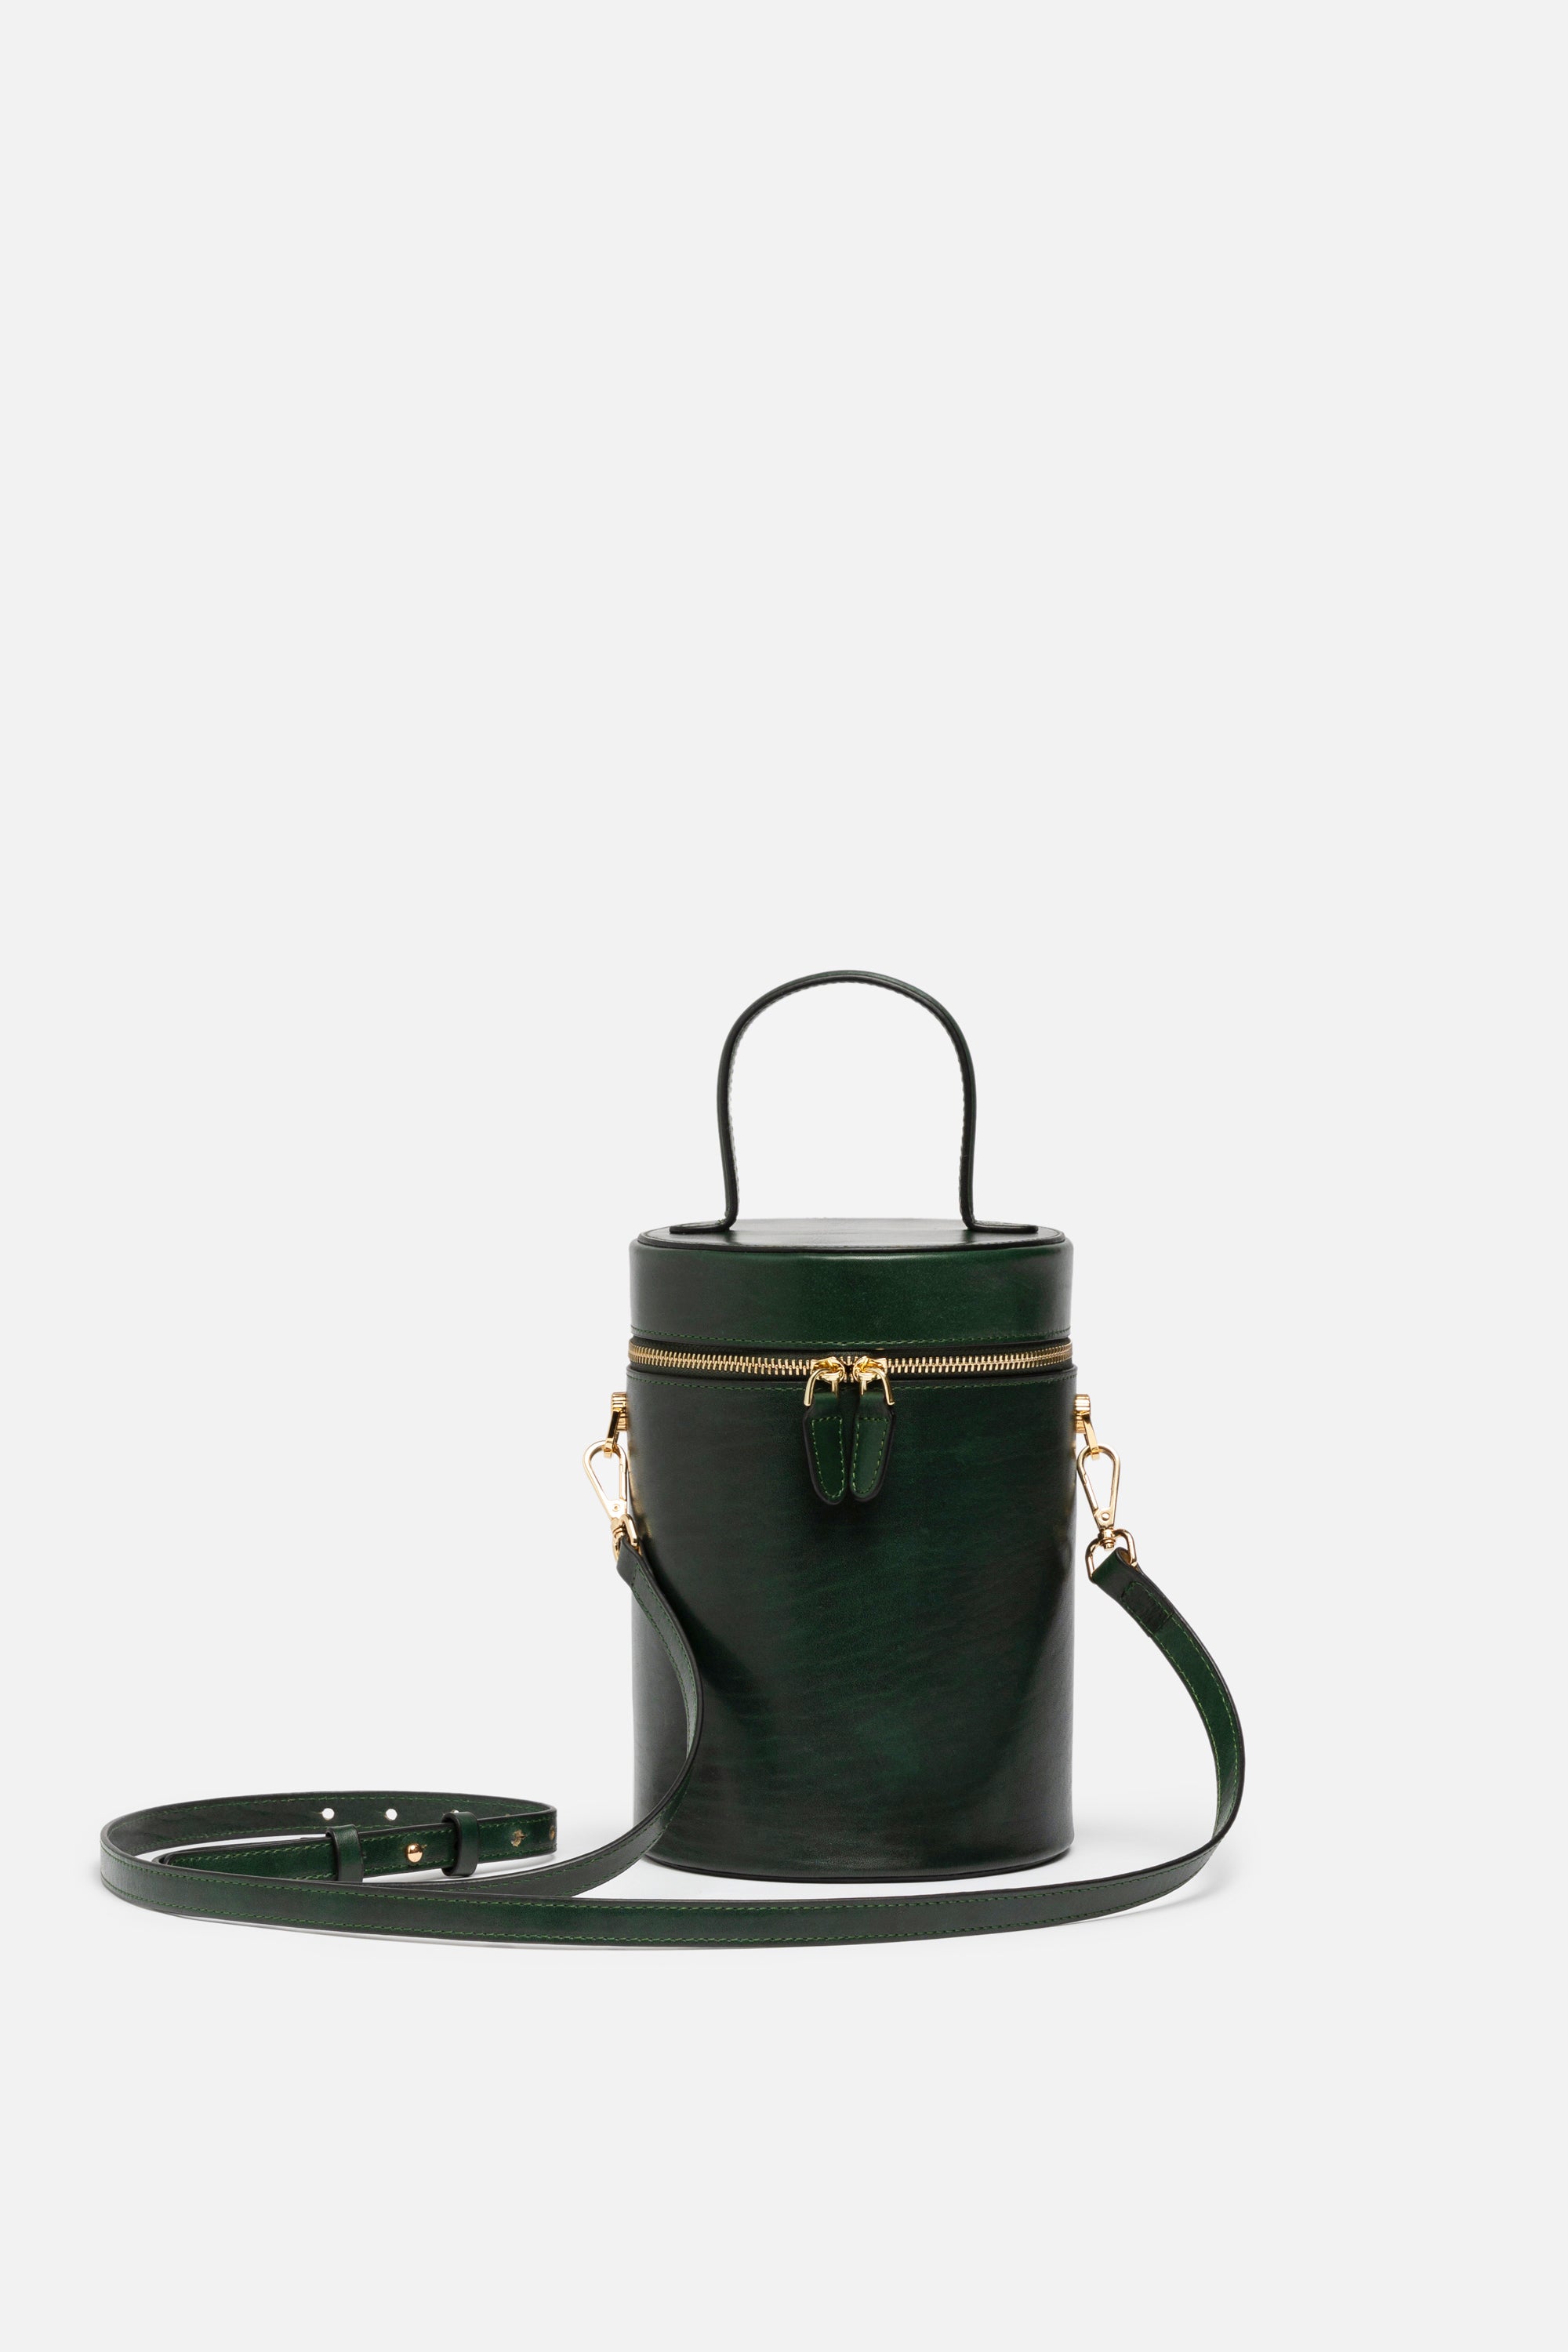 Full-Grain Leather Bucket with Cowhide Pocket - Midnight Black